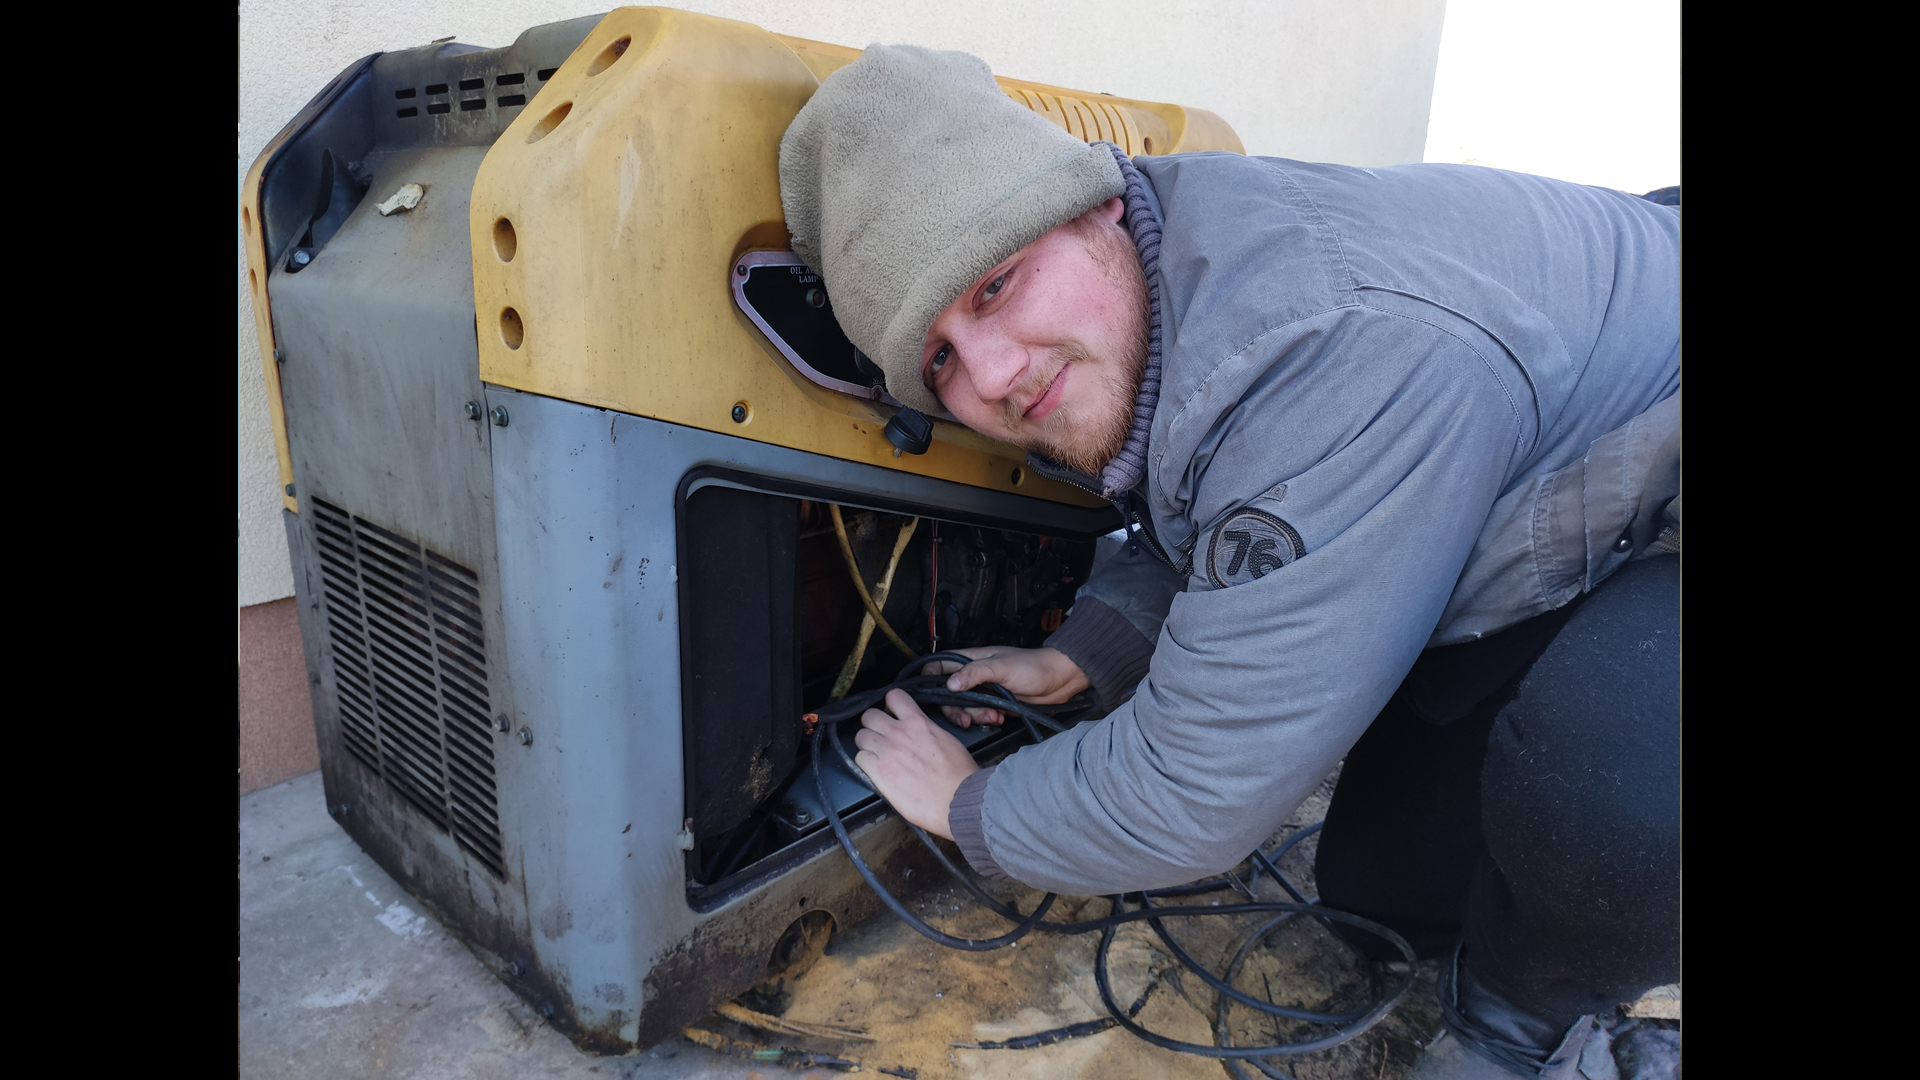 Ihor now spends his days travelling from site to site fixing equipment for Ukraine's defense forces.